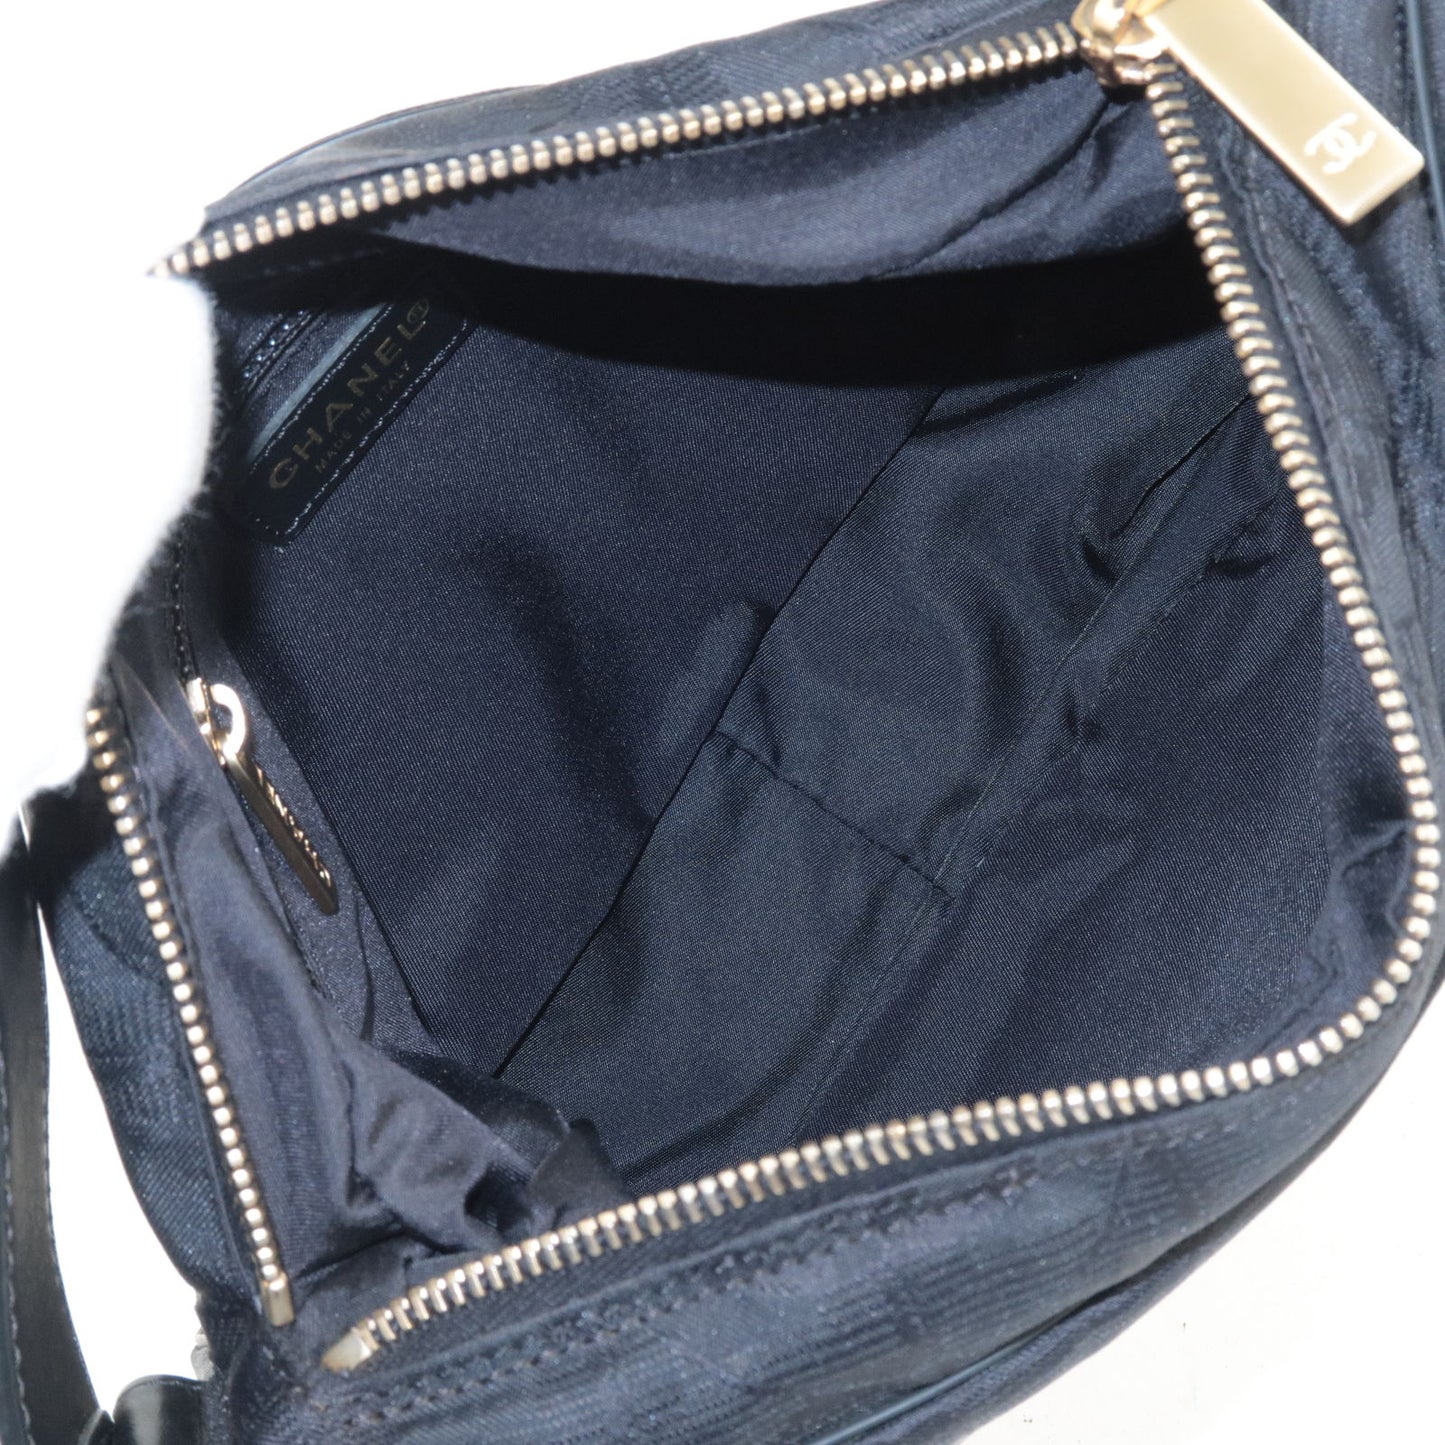 Black patent leather and silver-tone metal 2.55 reissue shoulder bag